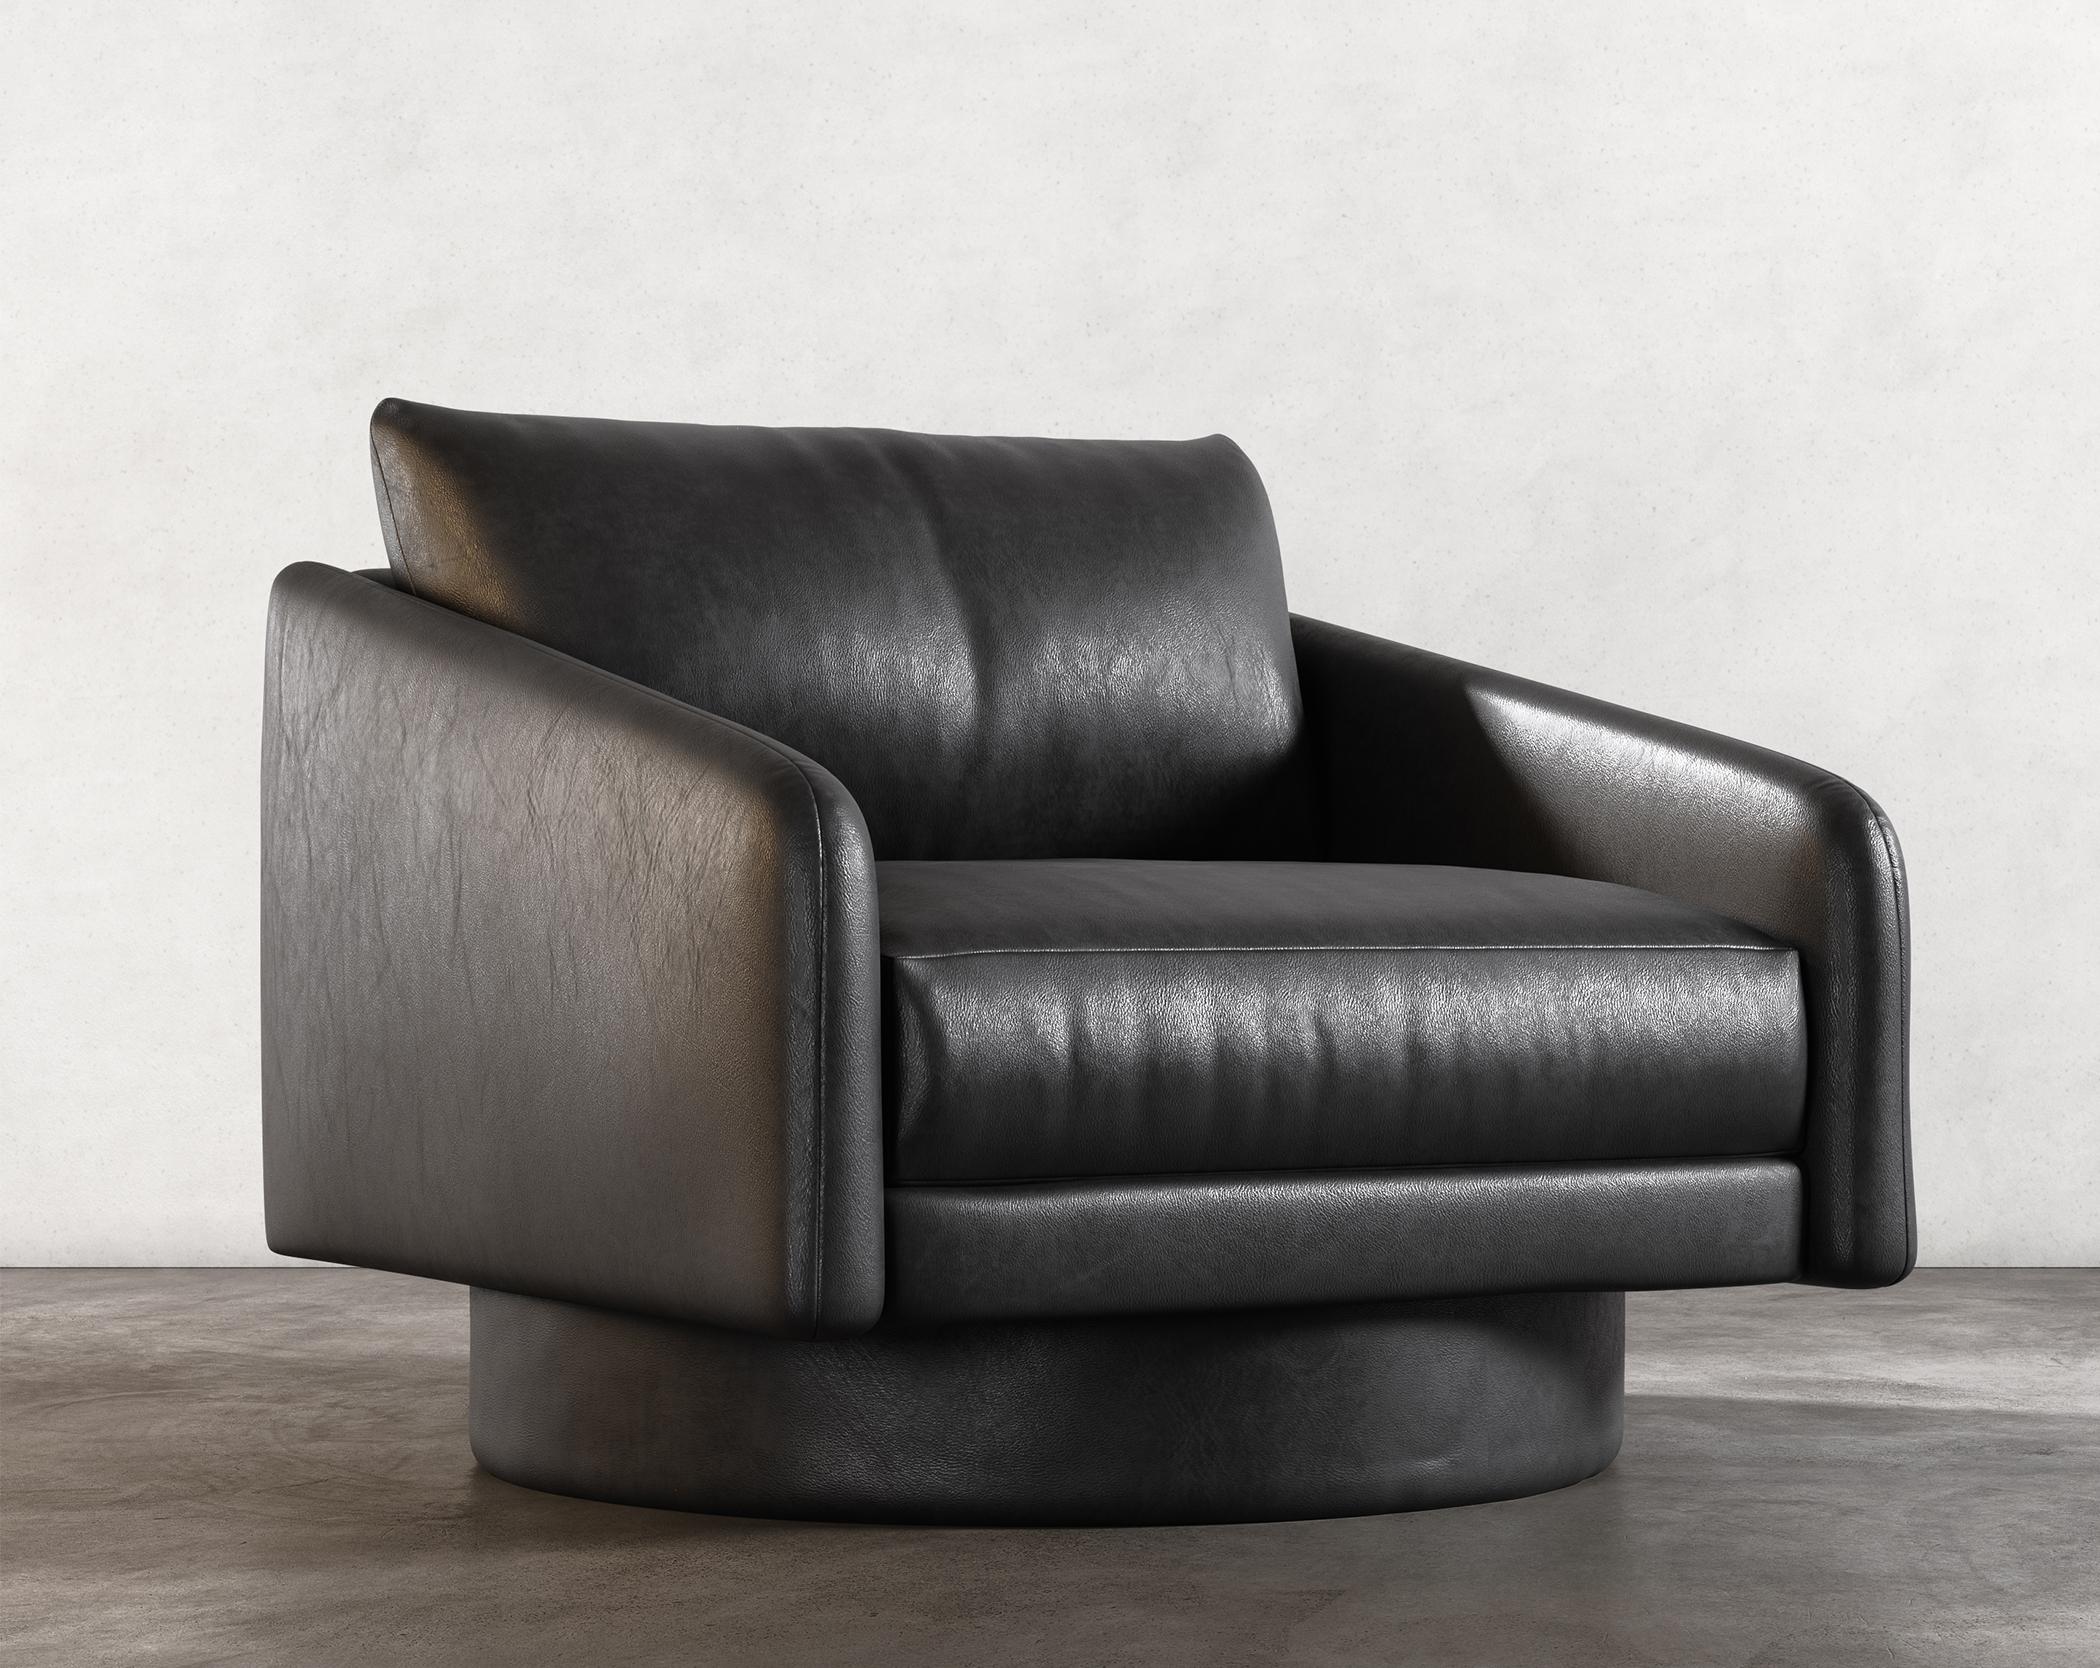 SURGE LOUNGE CHAIR - Modern Design in Faux Lambskin Black

Introducing our iconic Surge Chair, a modern chair in black faux lambskin - the perfect addition to any contemporary living room, bedroom, or office space.

Crafted with a sturdy all-wood